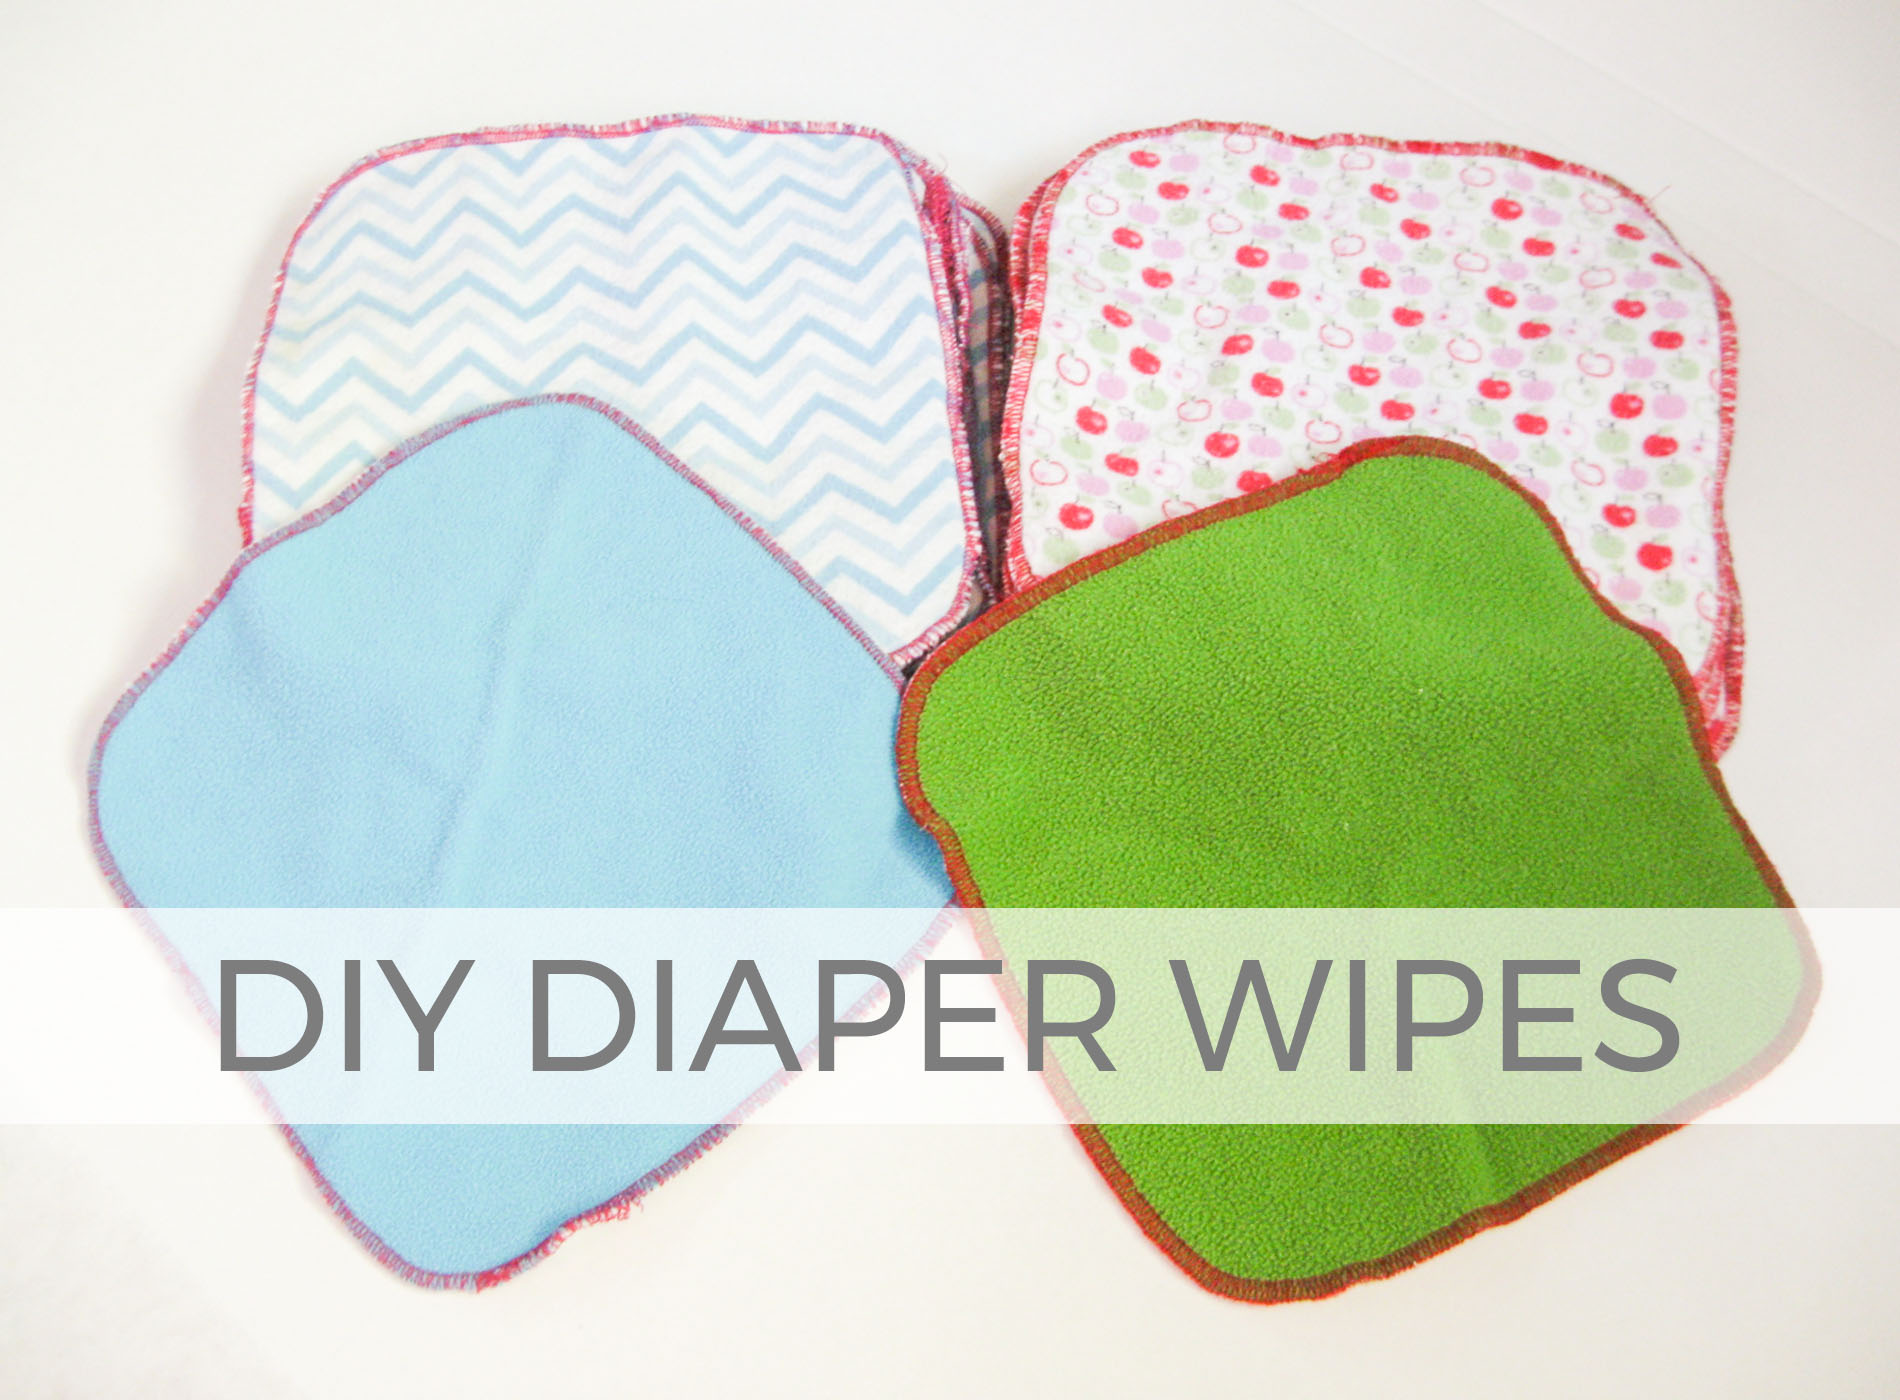 Take care of baby the best way with DIY diaper wipes | by Larissa of Prodigal Pieces | prodigalpieces.com #prodigalpieces